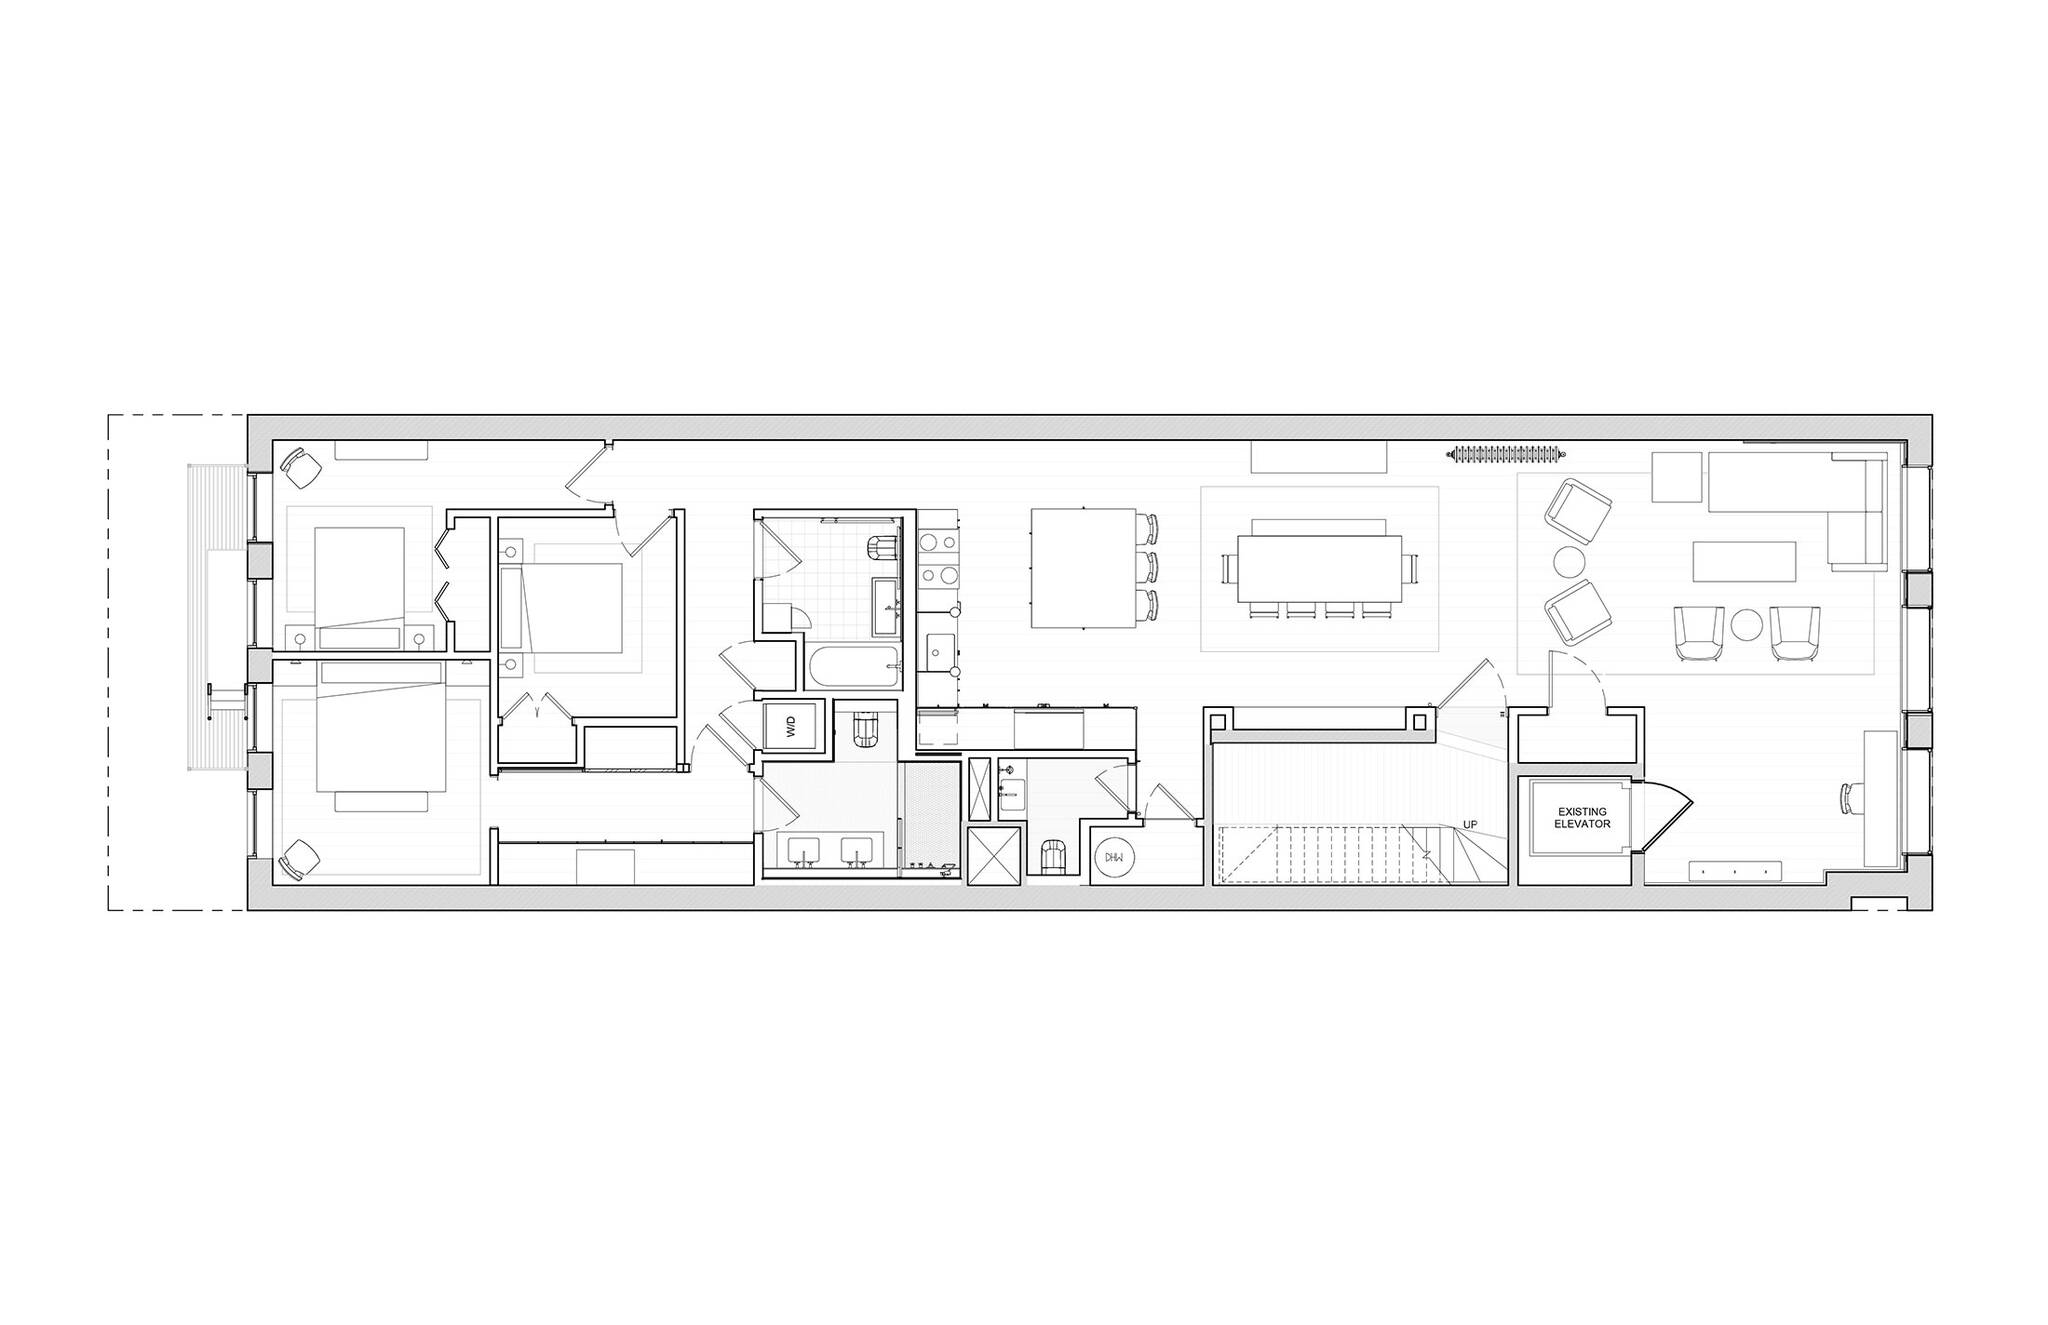 Site plan of the Residence renovation project on the East Side of Manhattan, New York City designed by the architecture studio Danny Forster & Architecture